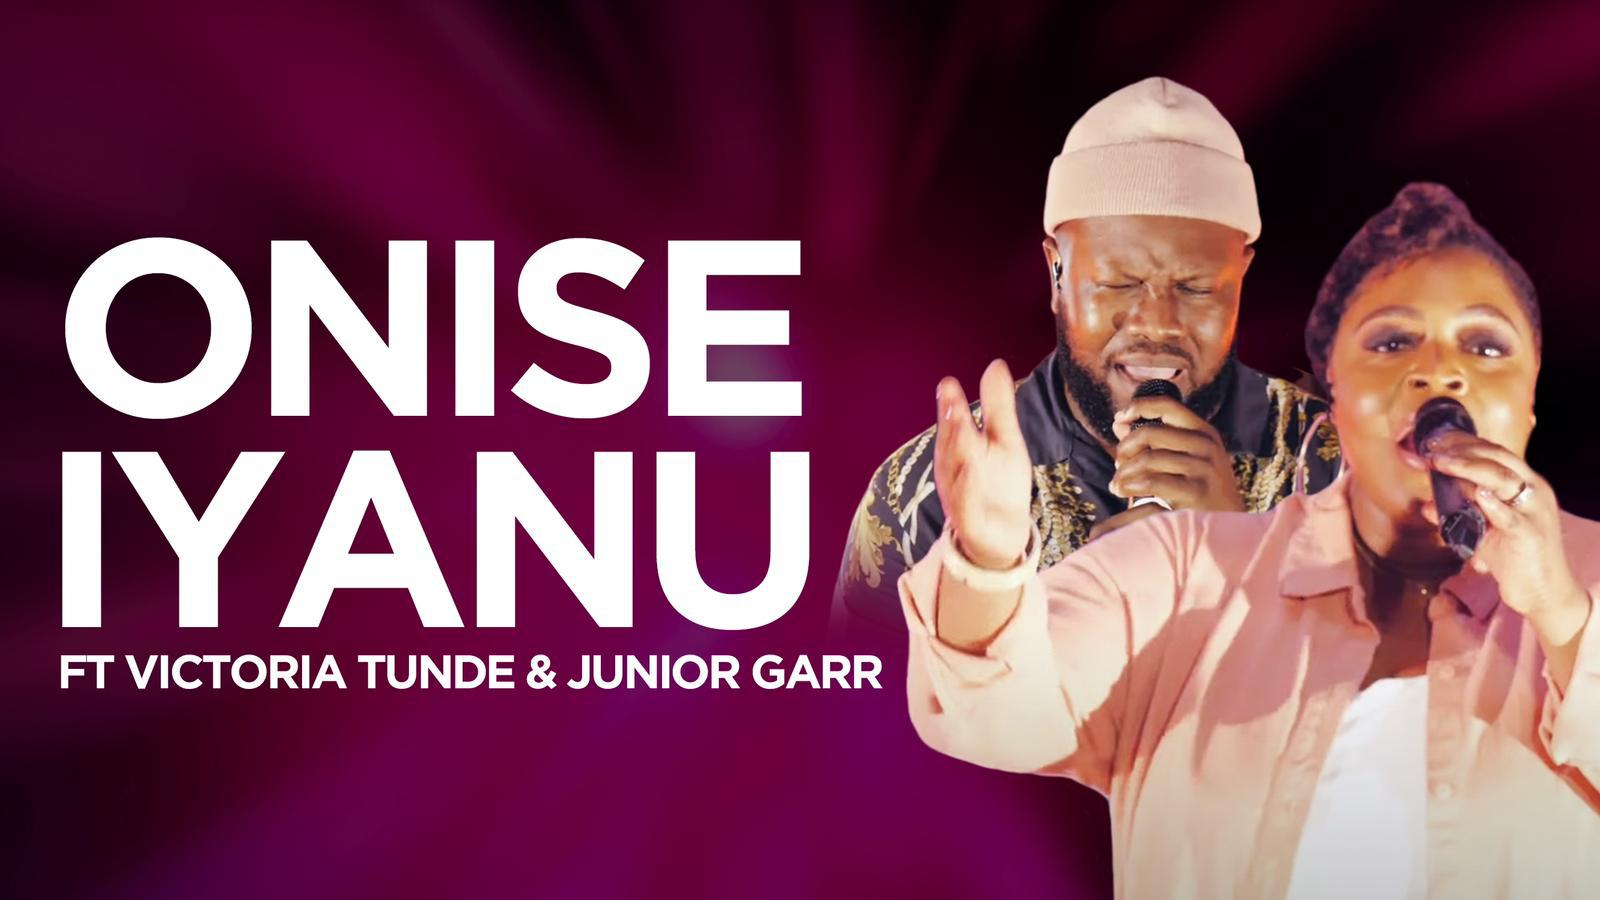 Victoria Tunde Releases Video For 'Onise Iyanu' Featuring Junior Garr